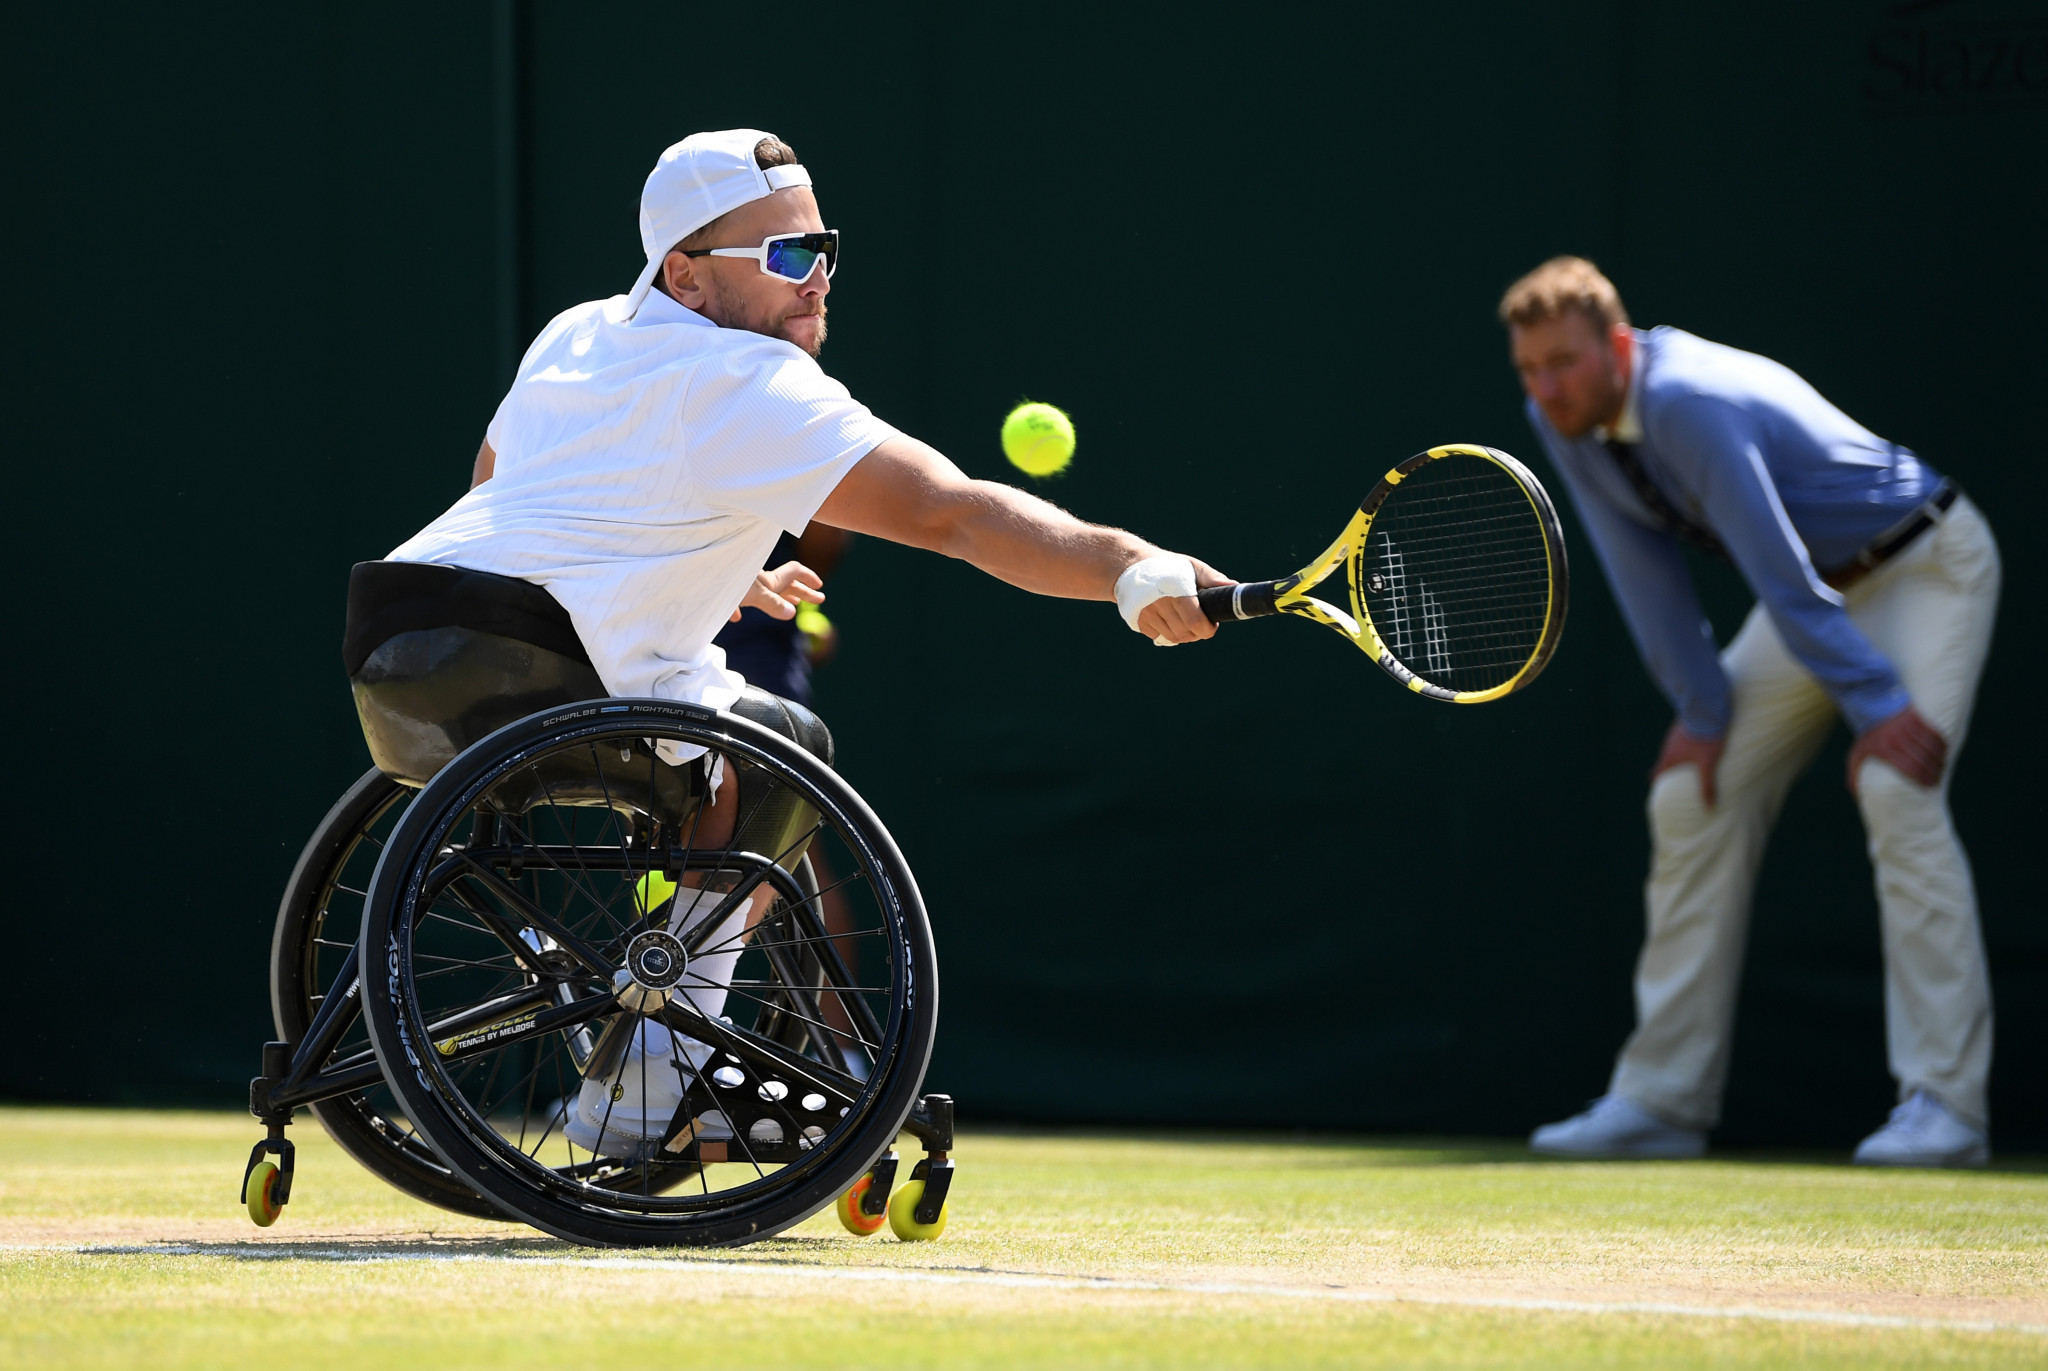 Alcott and Lapthorne through to final as quad wheelchair tennis makes competitive debut at Wimbledon 